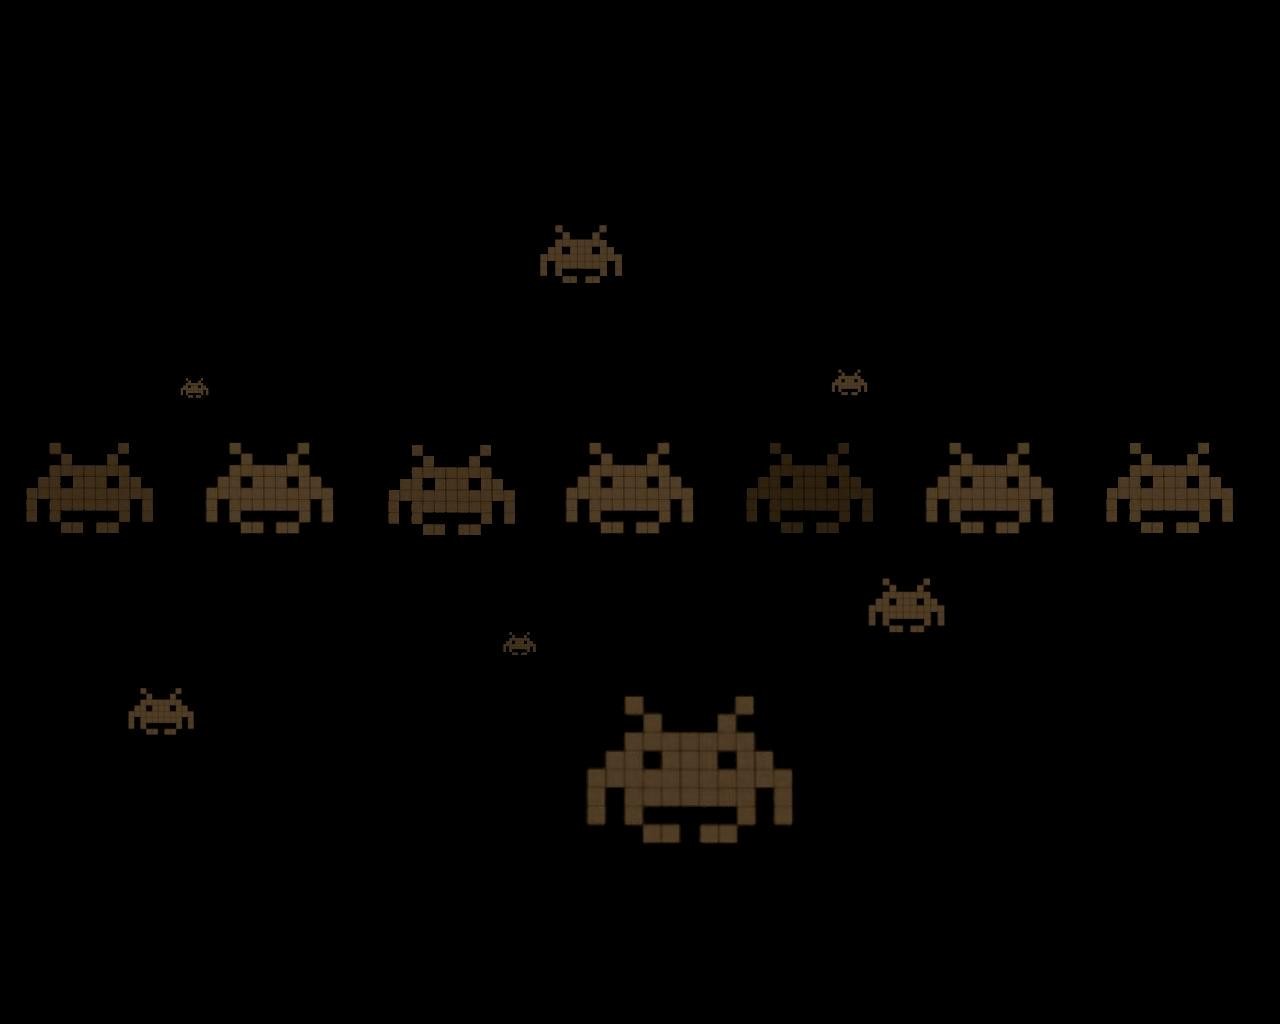 General 1280x1024 Space Invaders retro games video games minimalism simple background